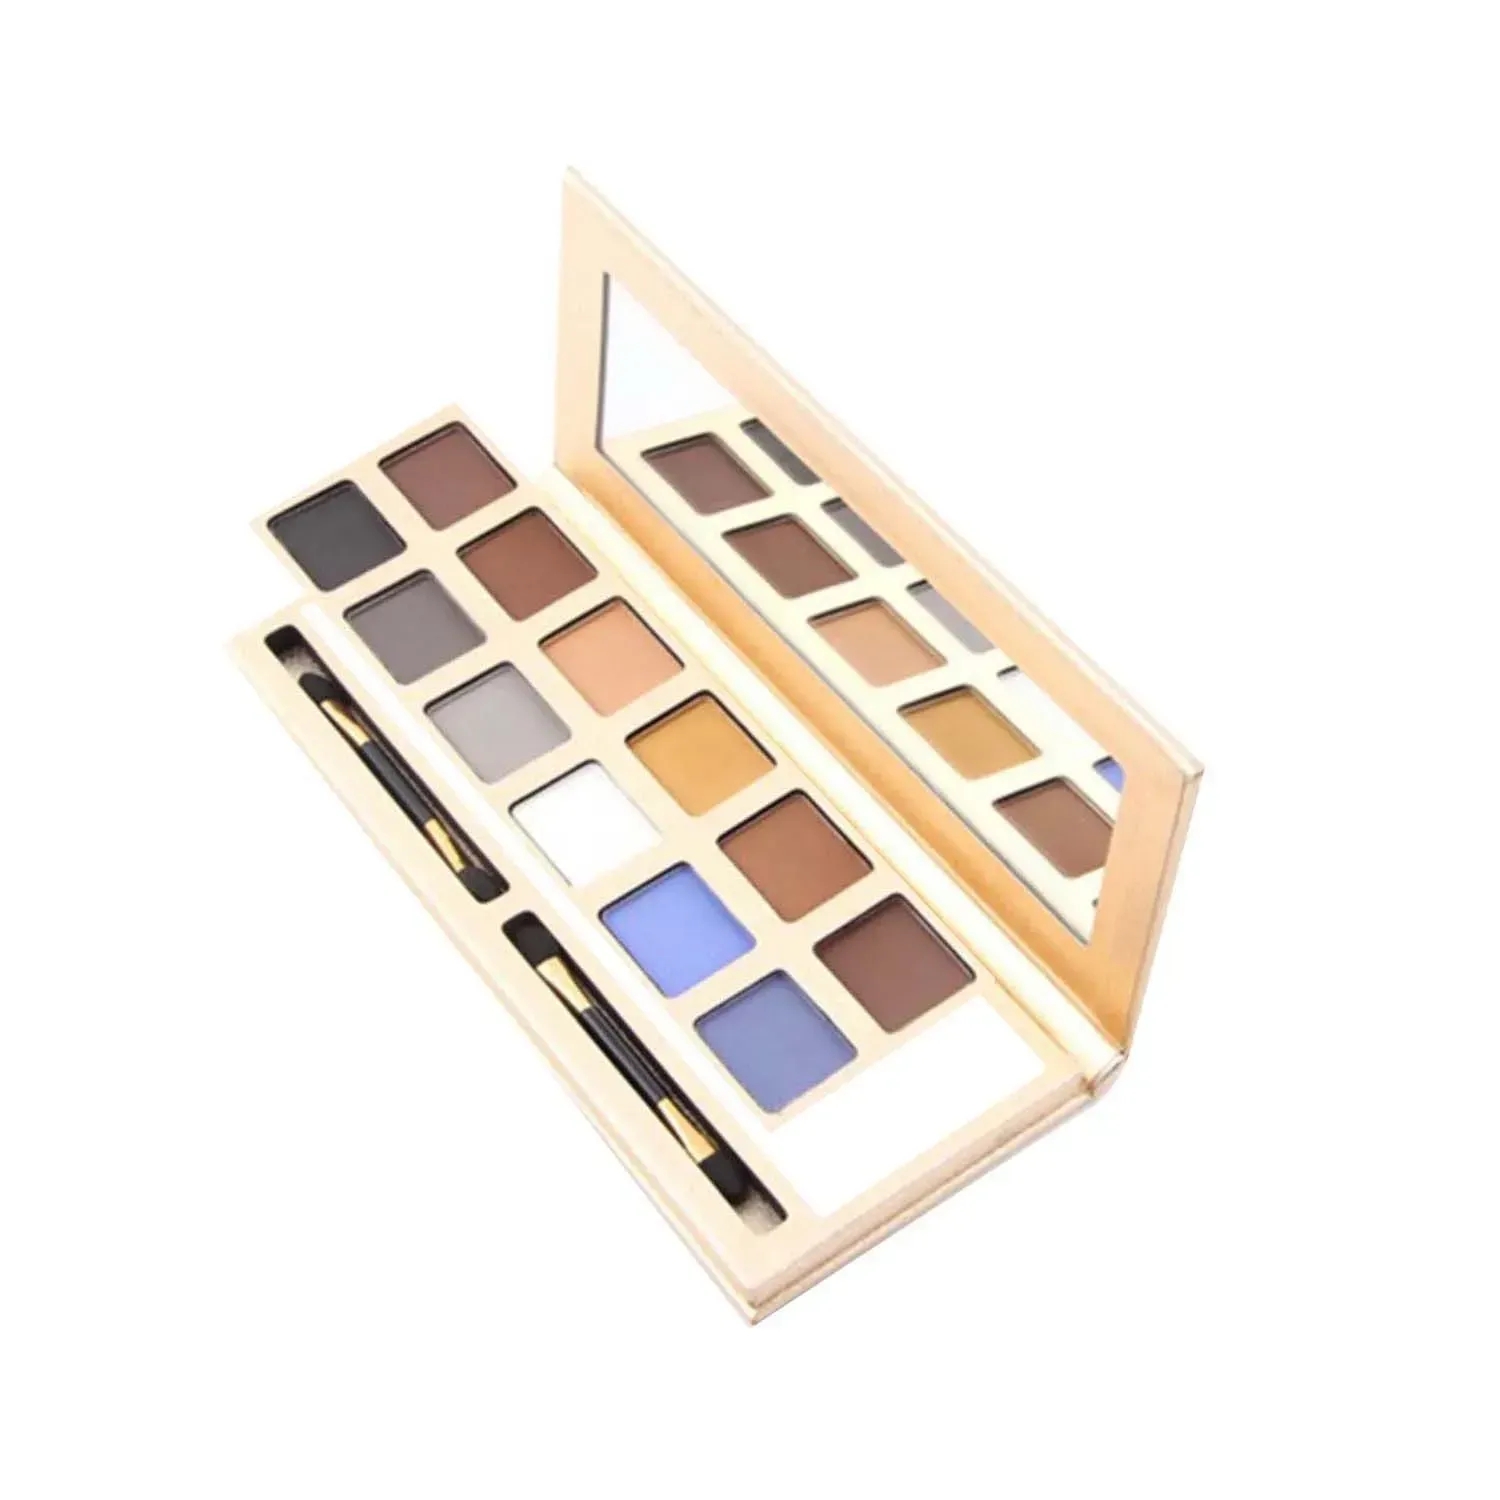 Miss Rose | Miss Rose 12 Color Nude Eyeshadow Palette - NY1 (20g)